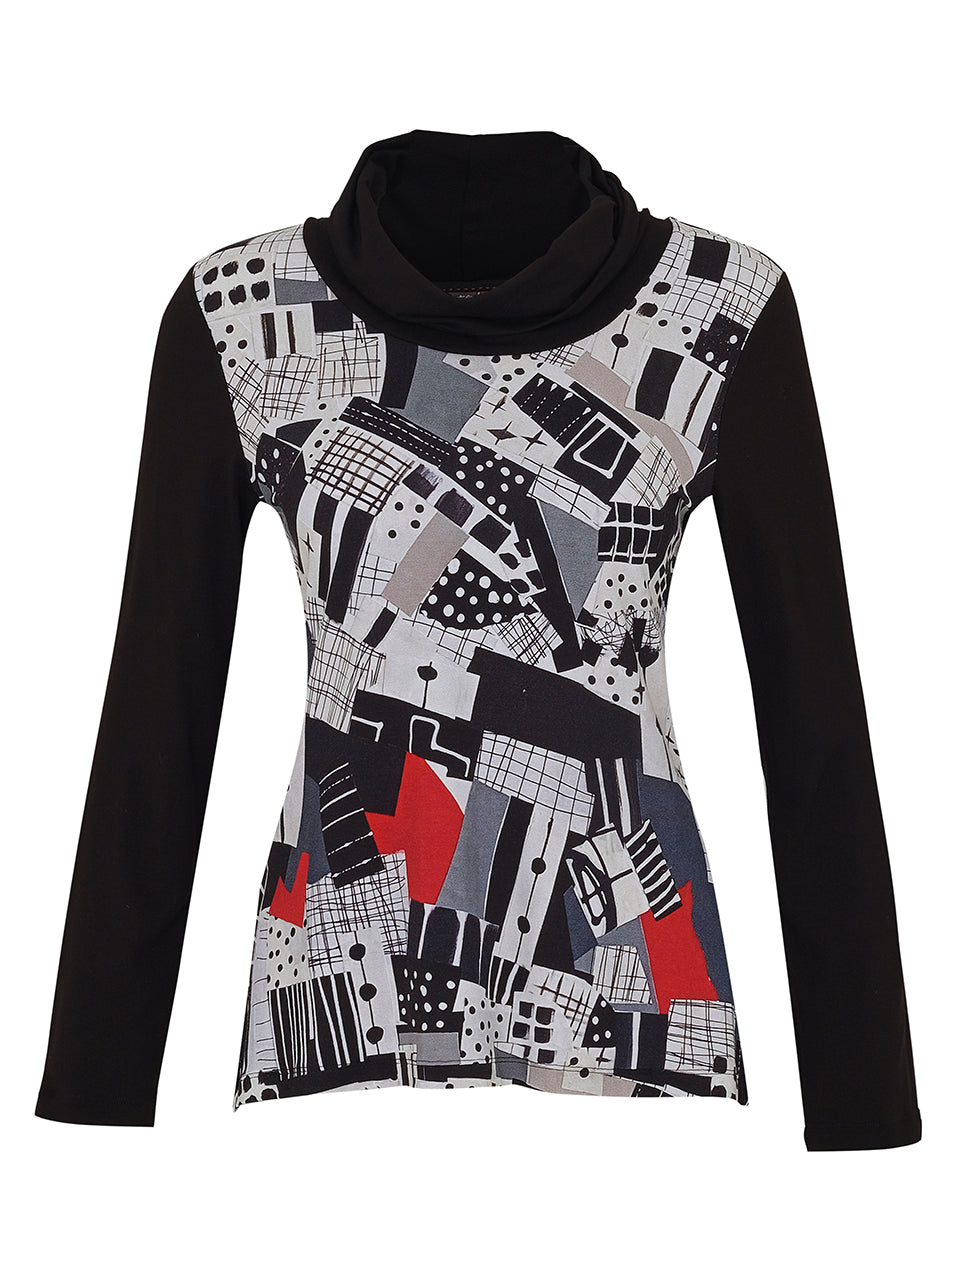 Dolcezza “Tear Down The Wall” Black, White, Grey & Red Print Pullover